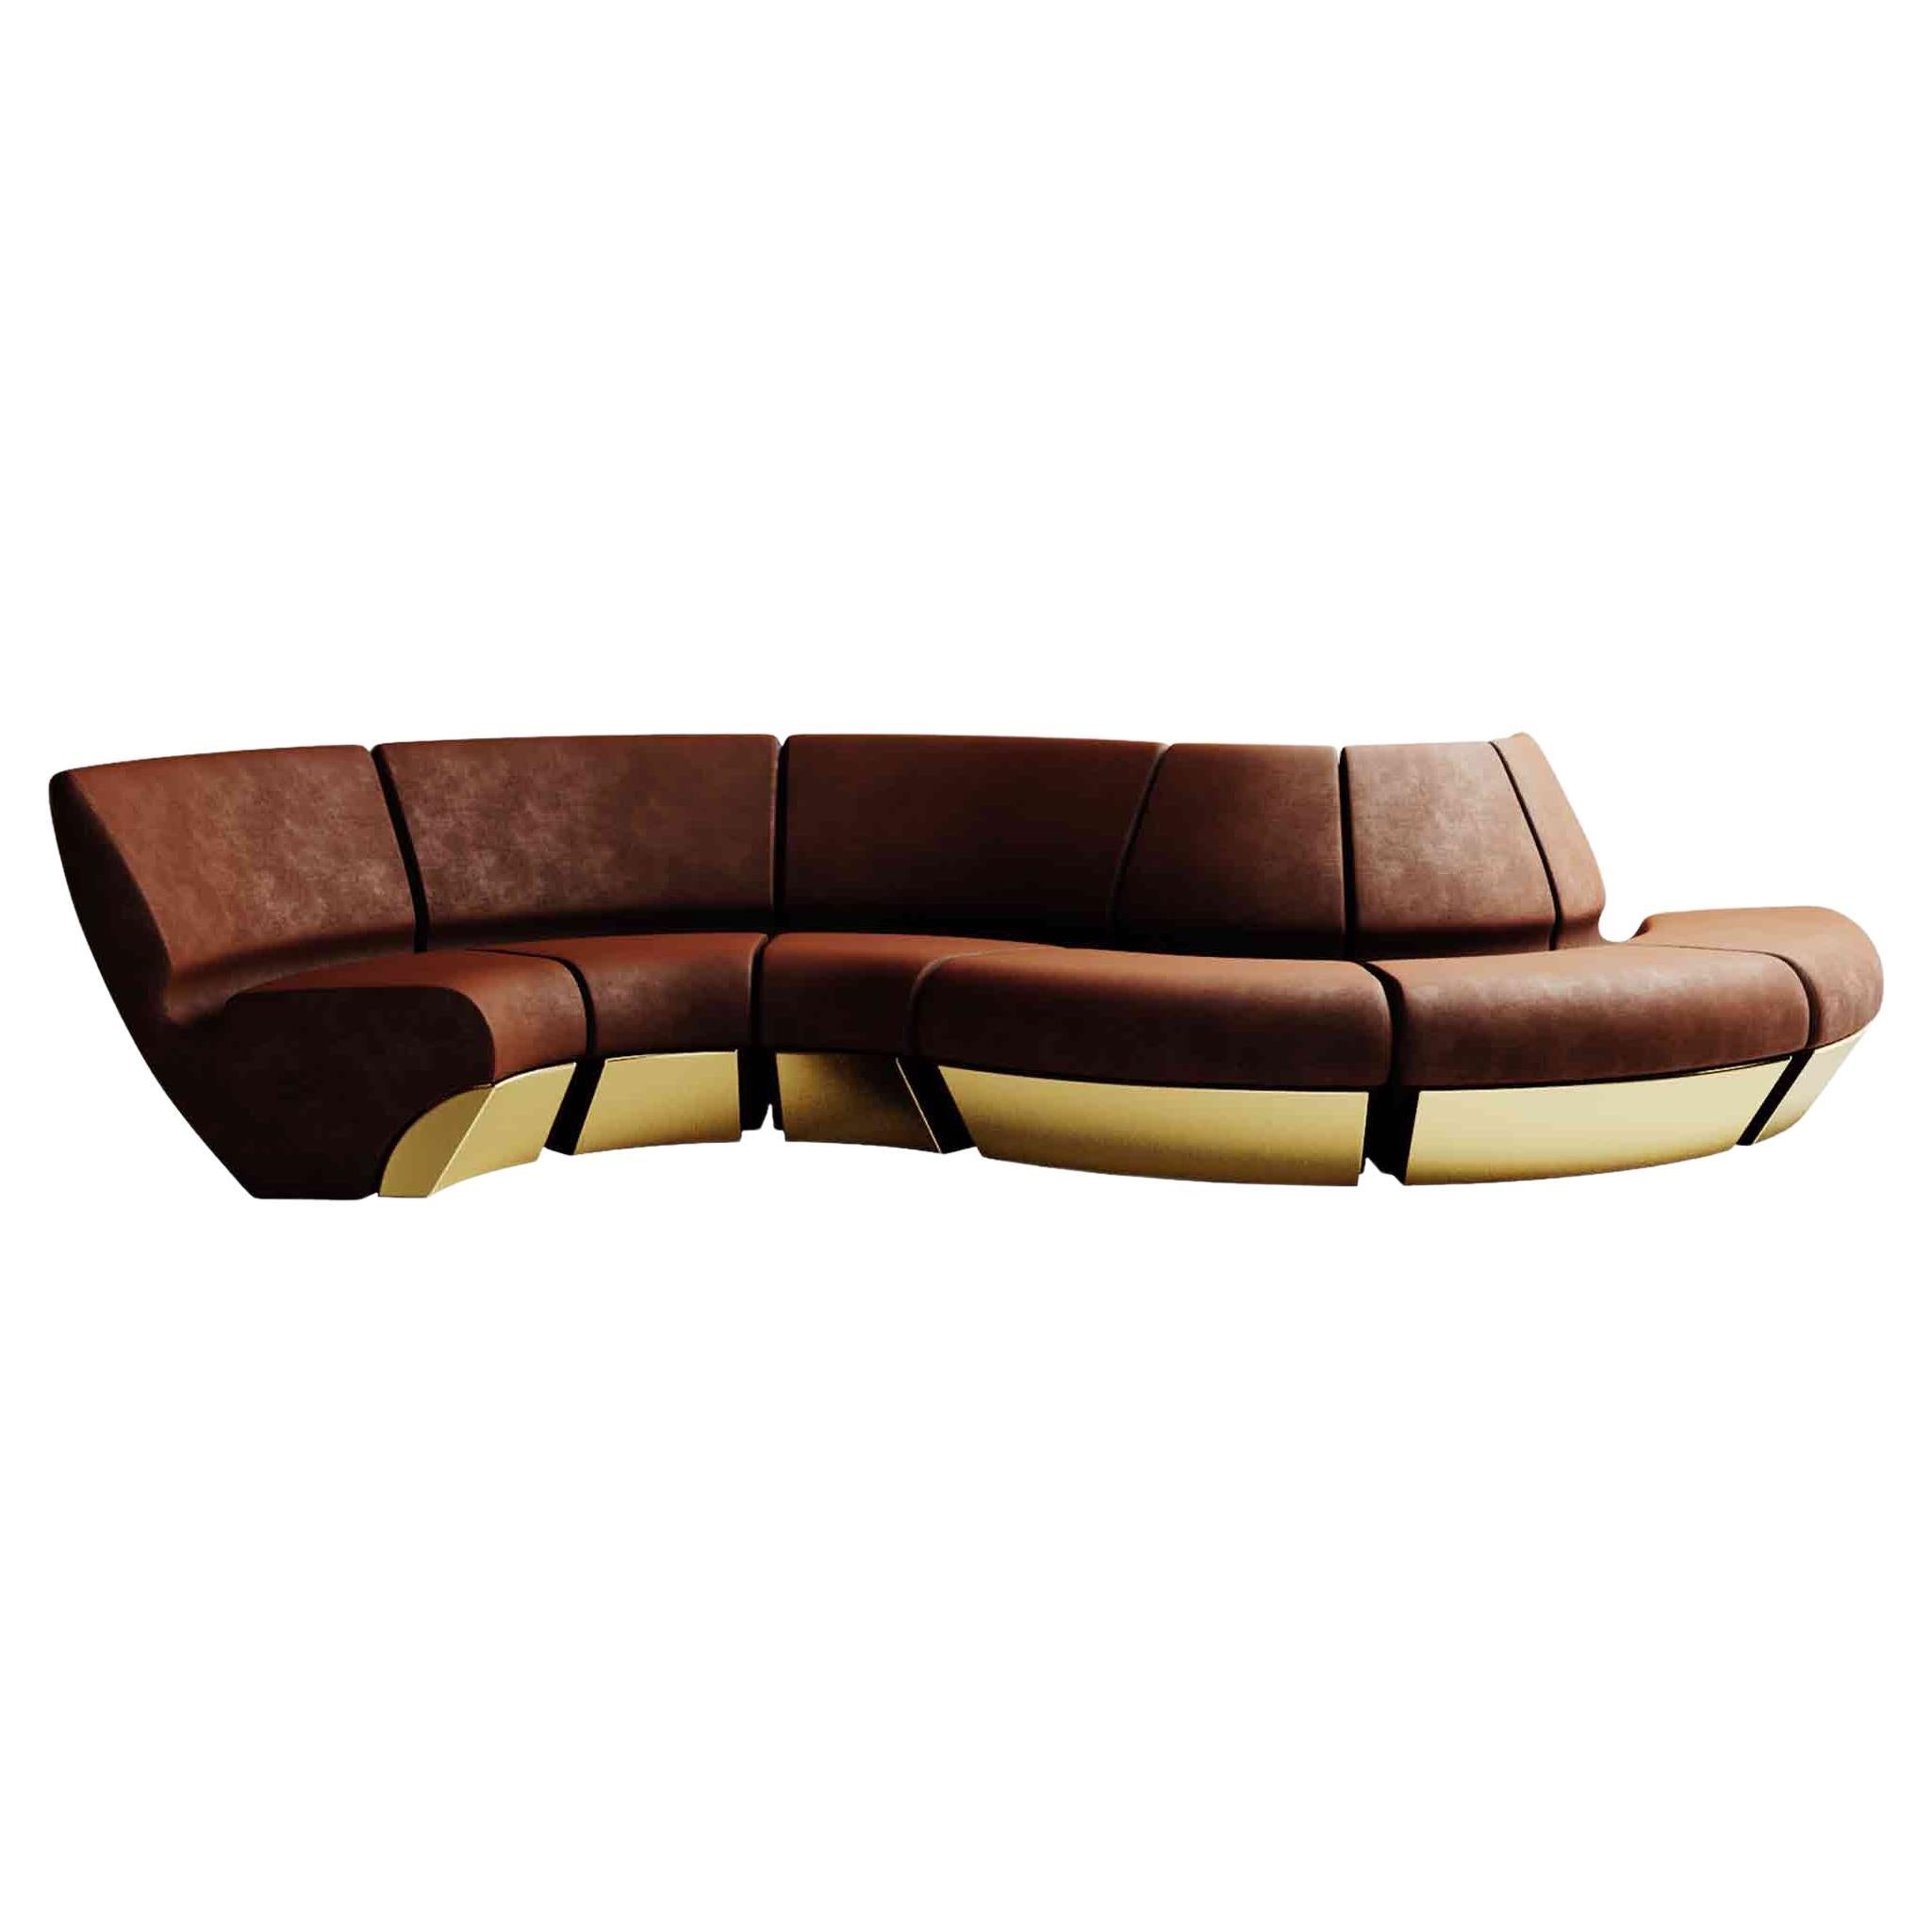 Contemporary Sectional Curvy Sofa in Velvet Upholstery & Polished Brass Details